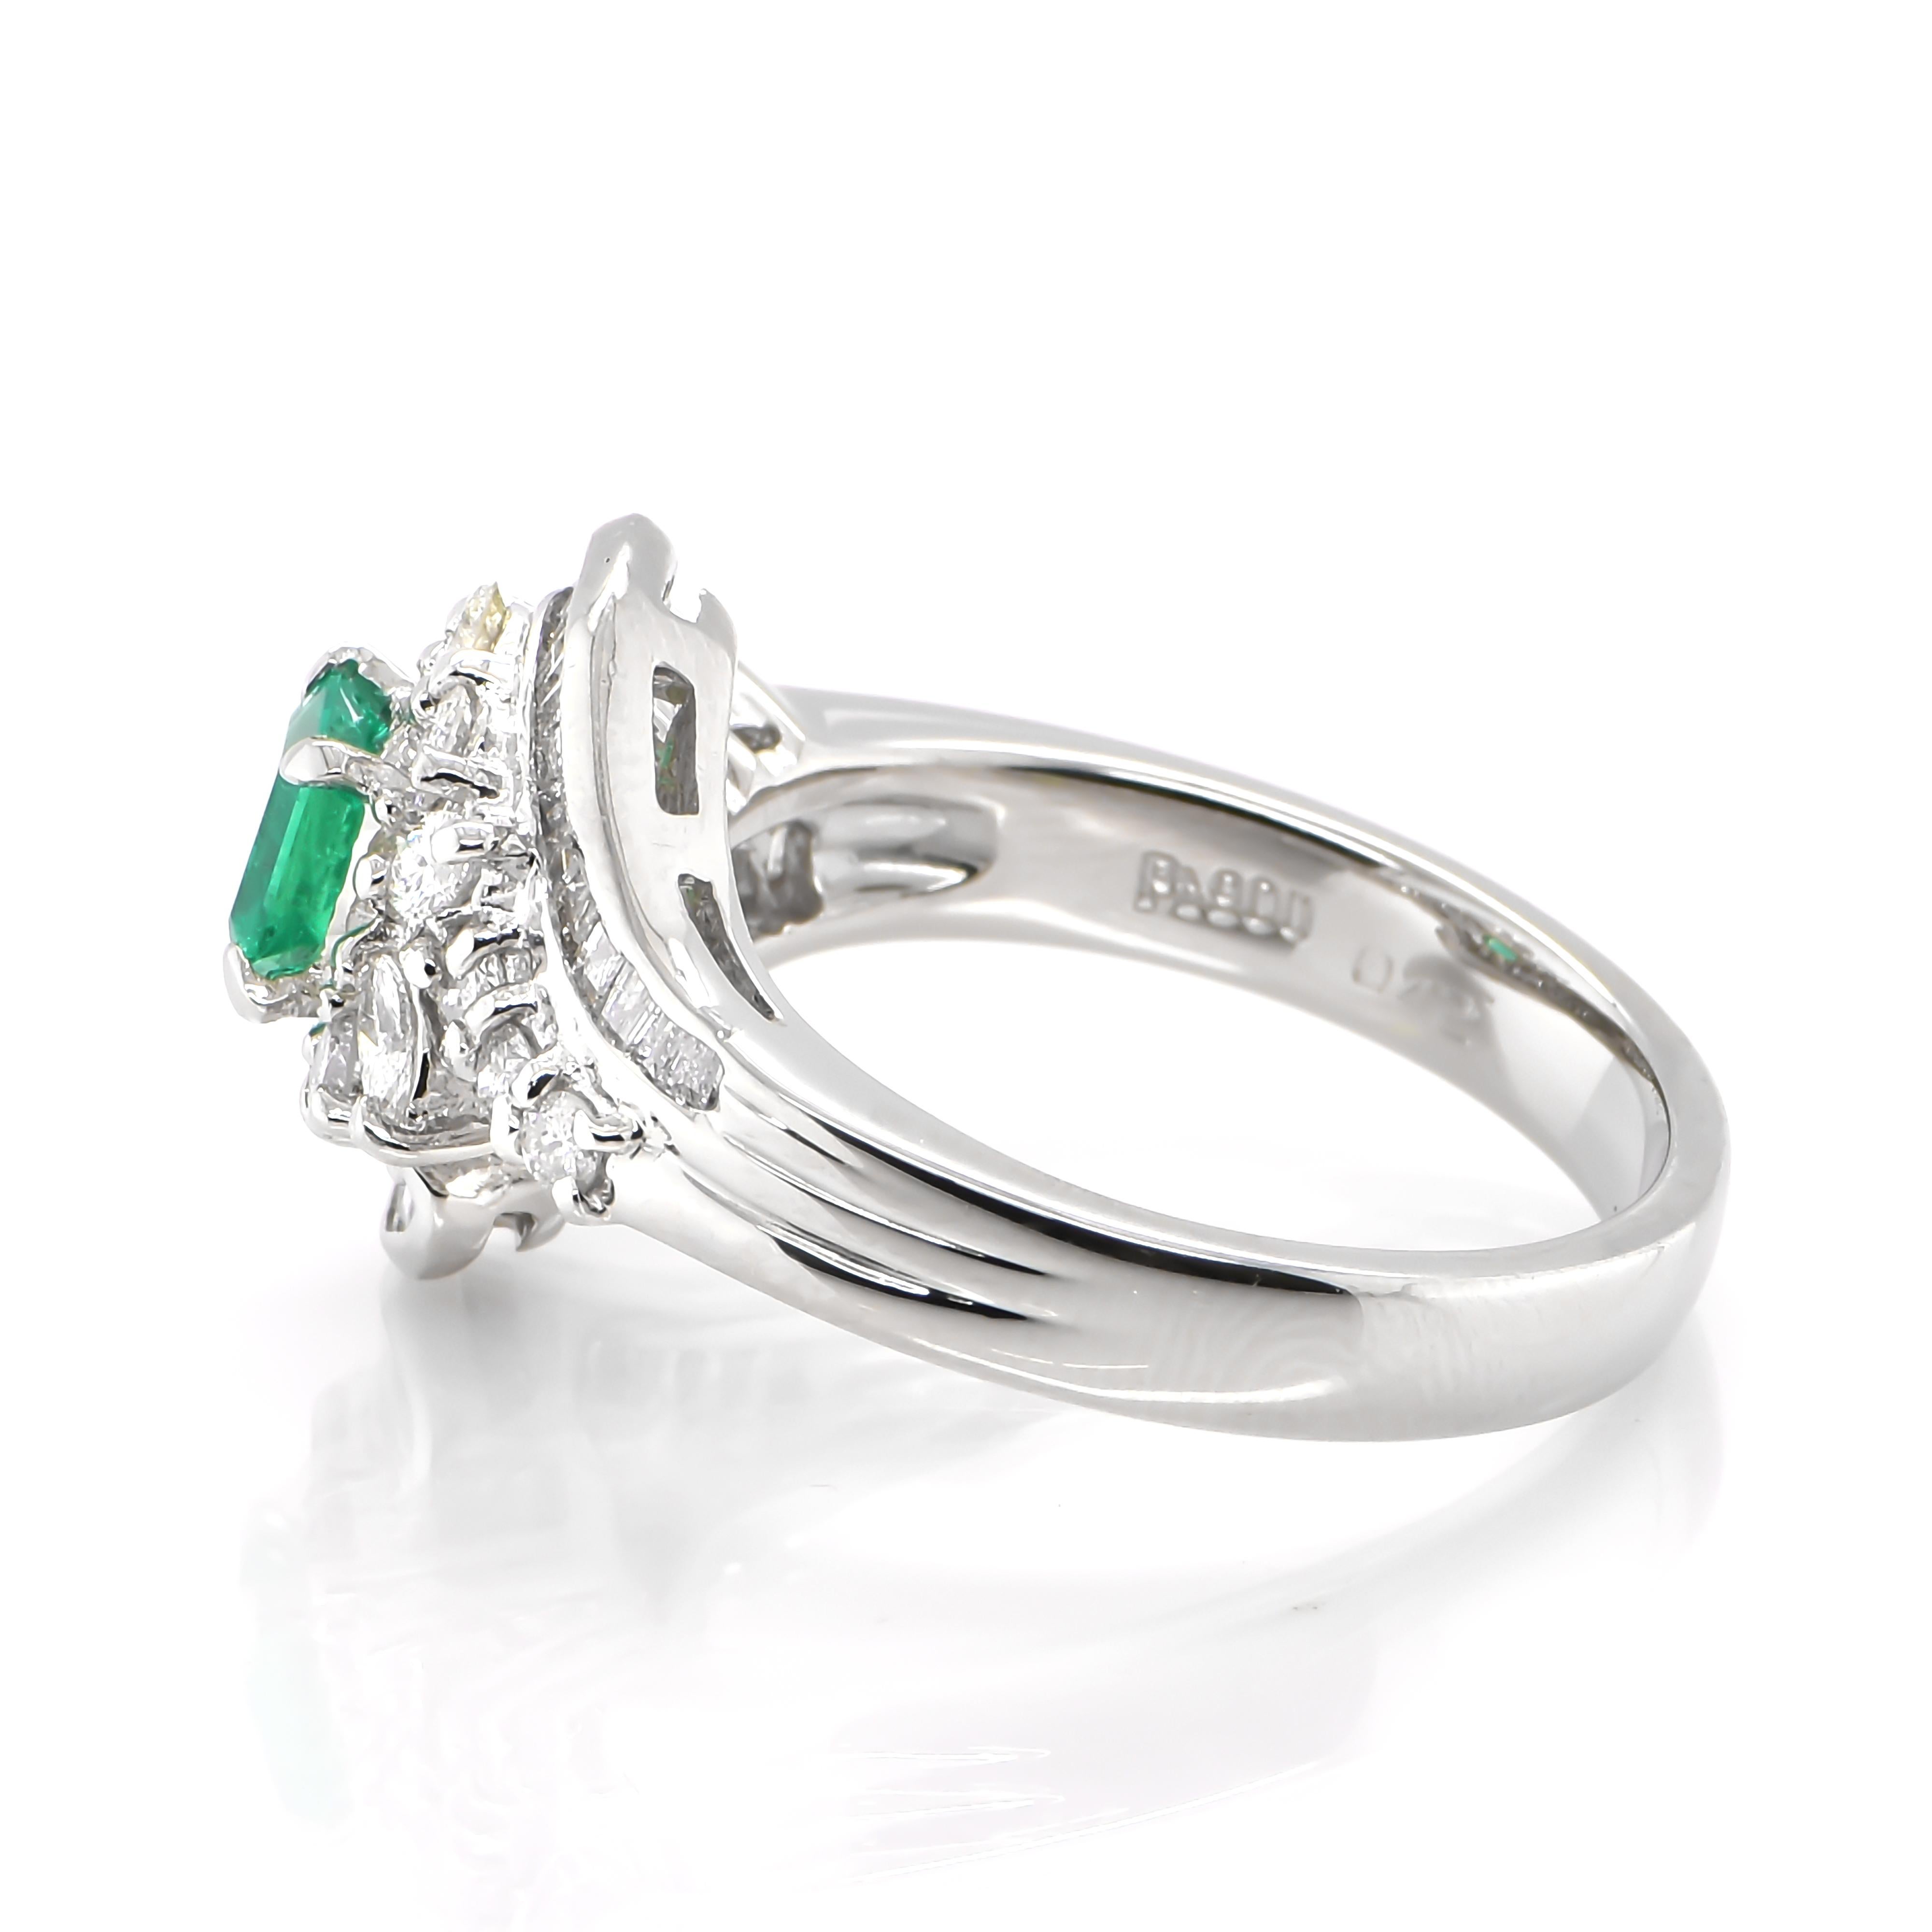 0.42 Carat Natural Vivid Green Emerald & Diamond Cocktail Ring Made in Platinum In Excellent Condition For Sale In Tokyo, JP